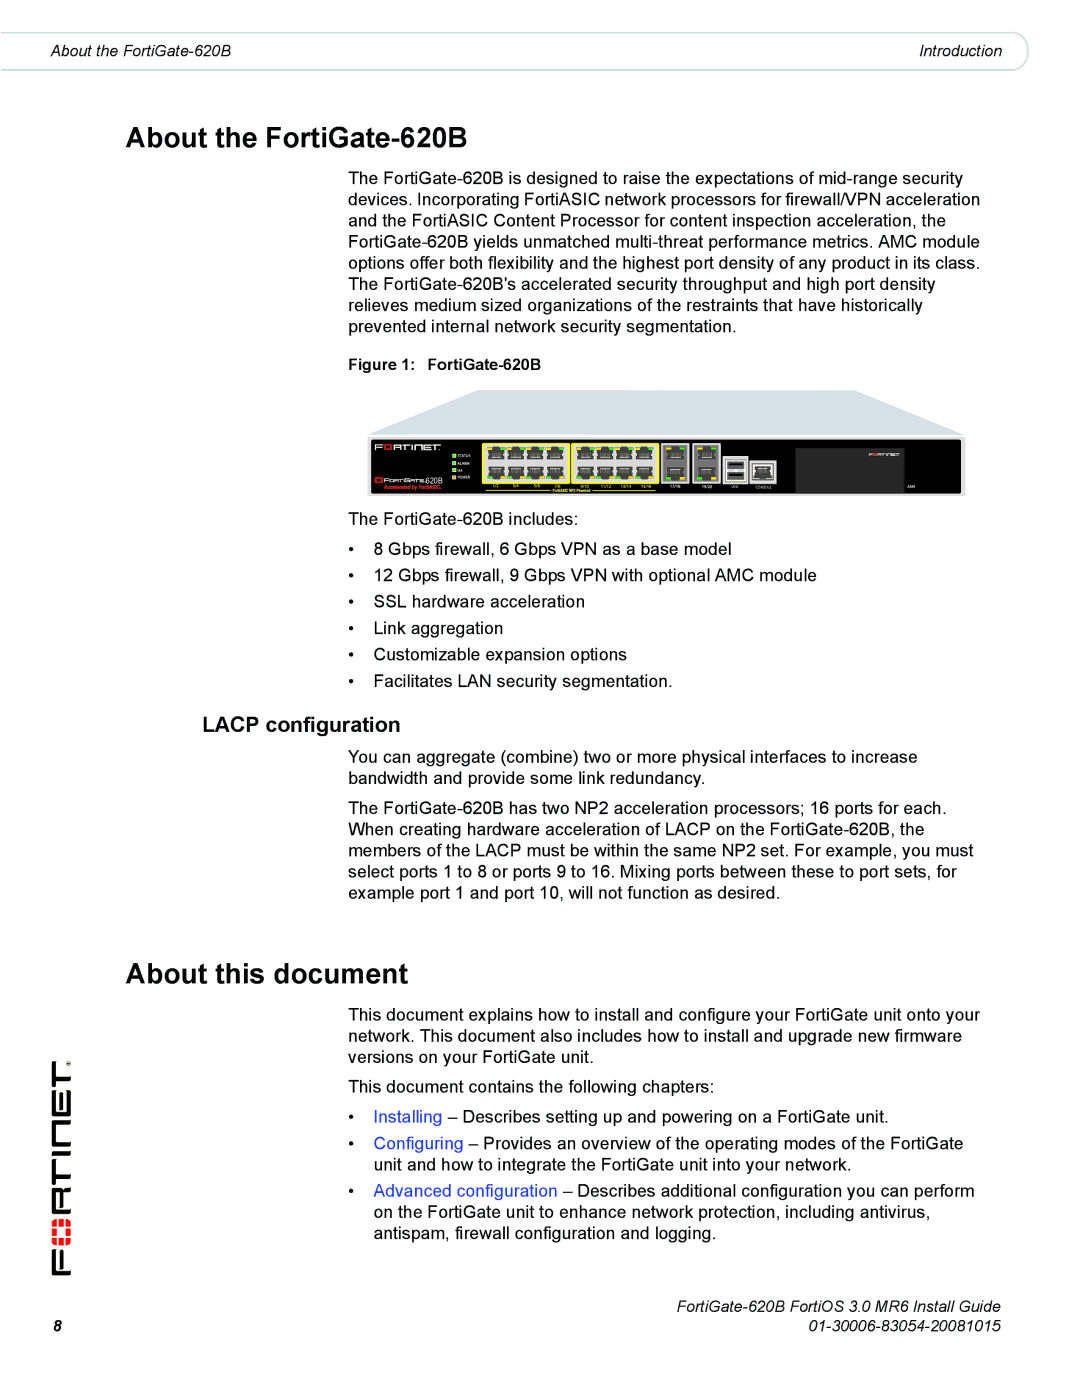 Fortinet manual About the FortiGate-620B, About this document, Lacp configuration 